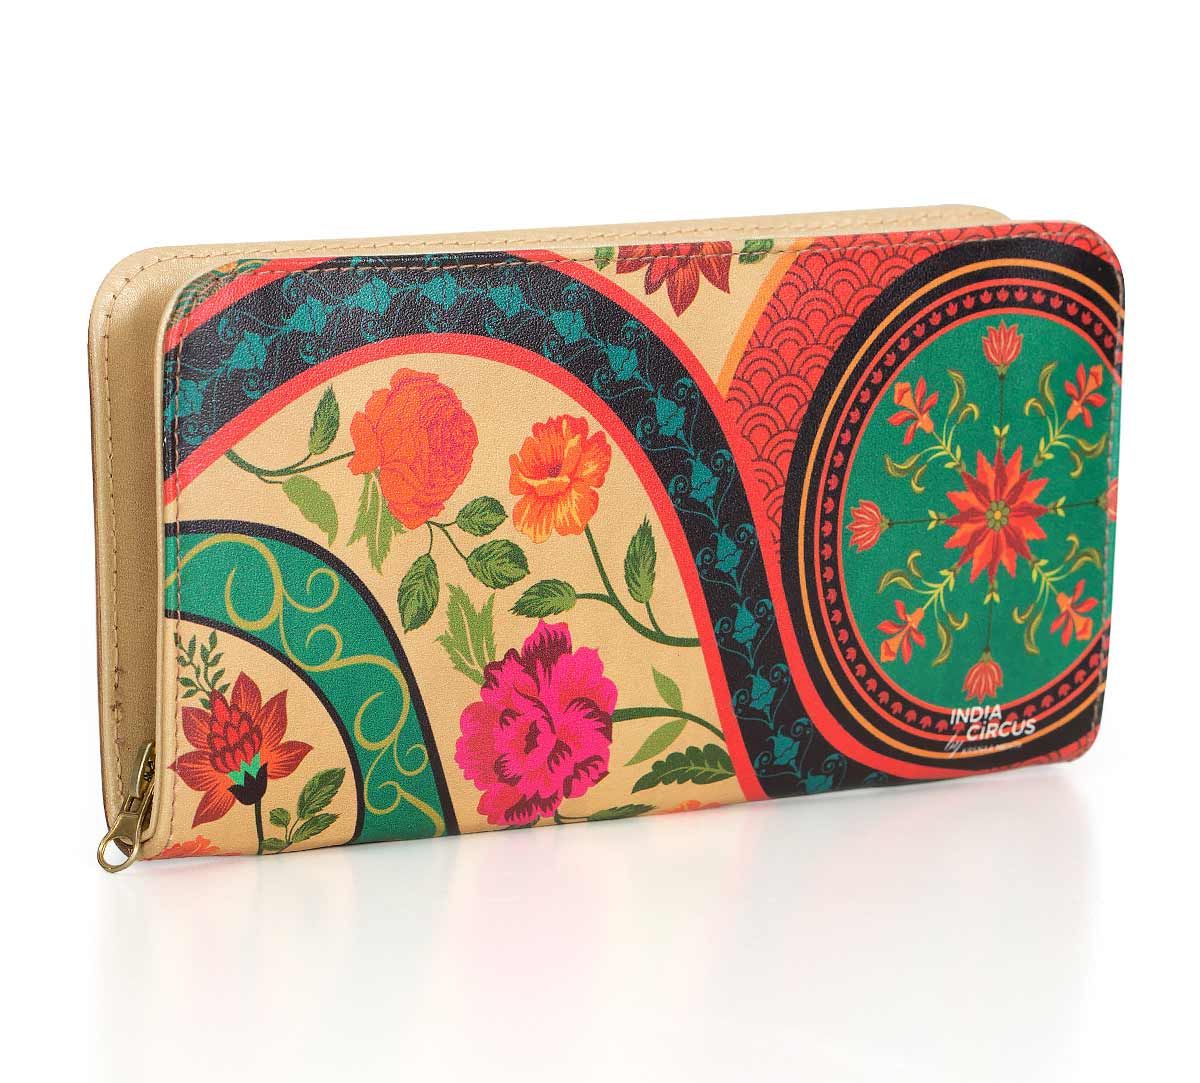 India Circus Floral Embroidery Ladies Zipper Wallet